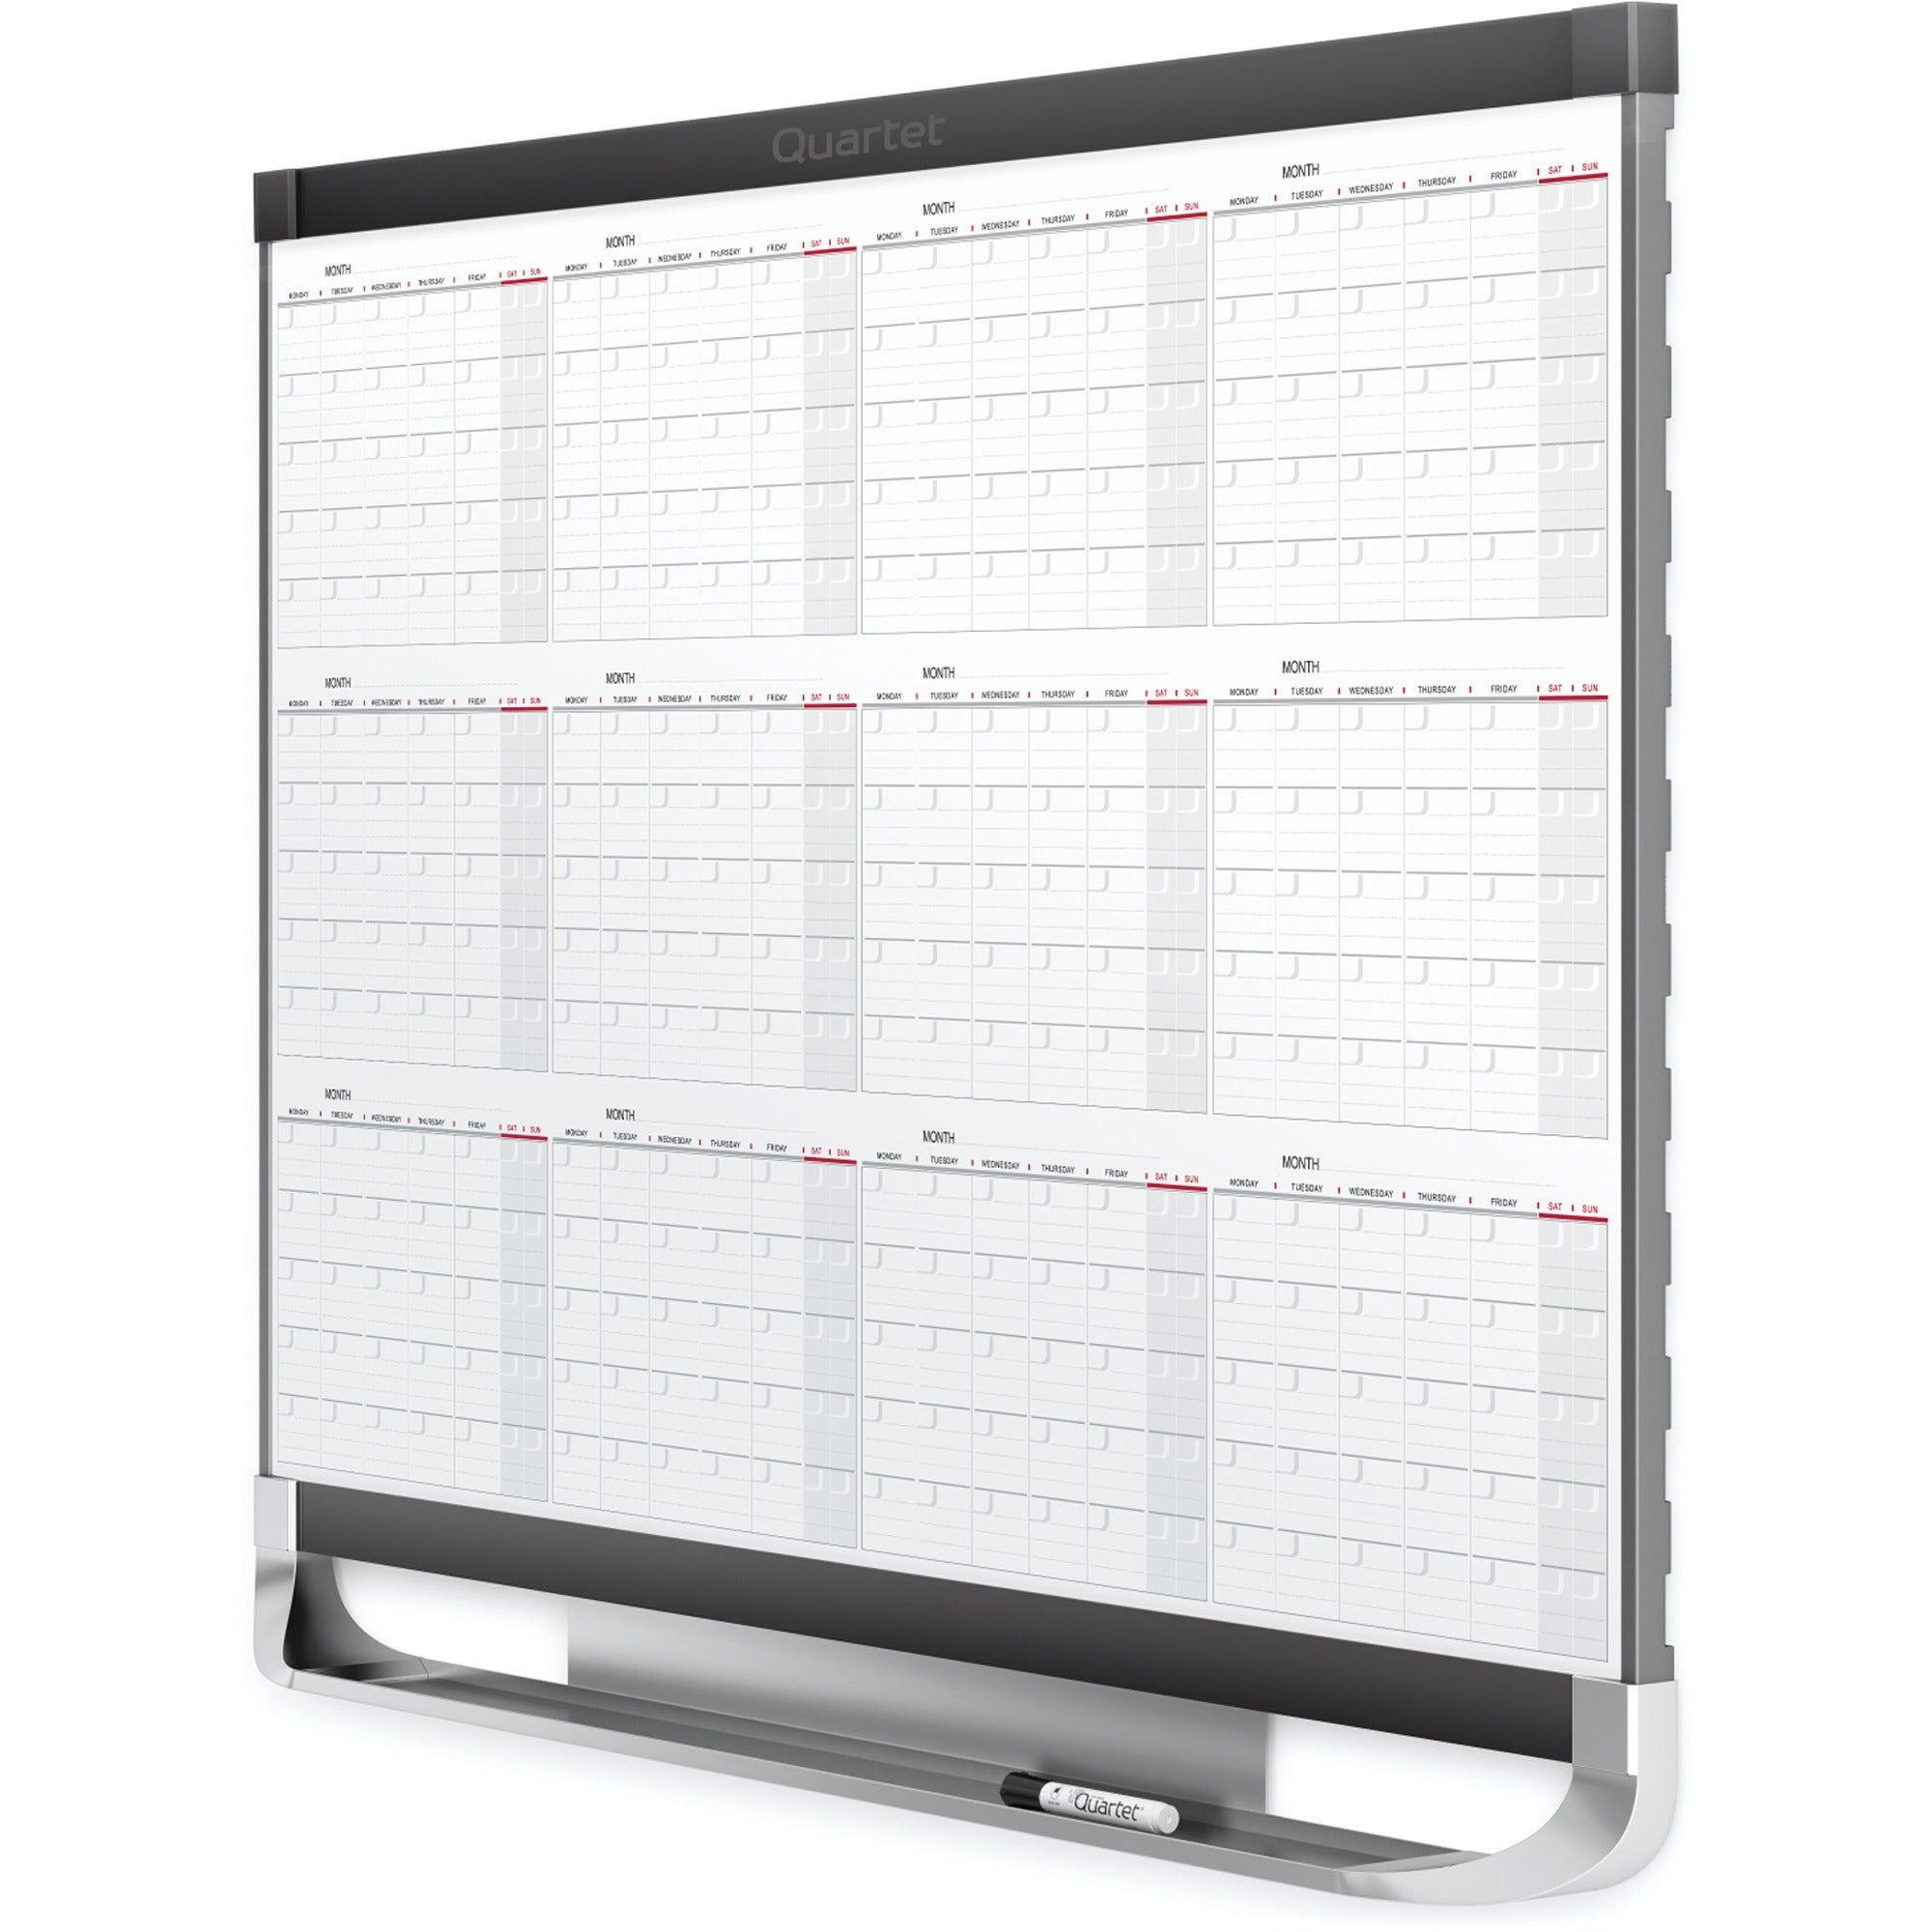 quartet-prestige-2-magnetic-calendar-board-monthly-12-month-white-graphite-steel-24-height-x-36-width-magnetic-ghost-resistant-stain-resistant-durable-marker-tray-mountable-1-each_qrt12mcp23p2 - 2